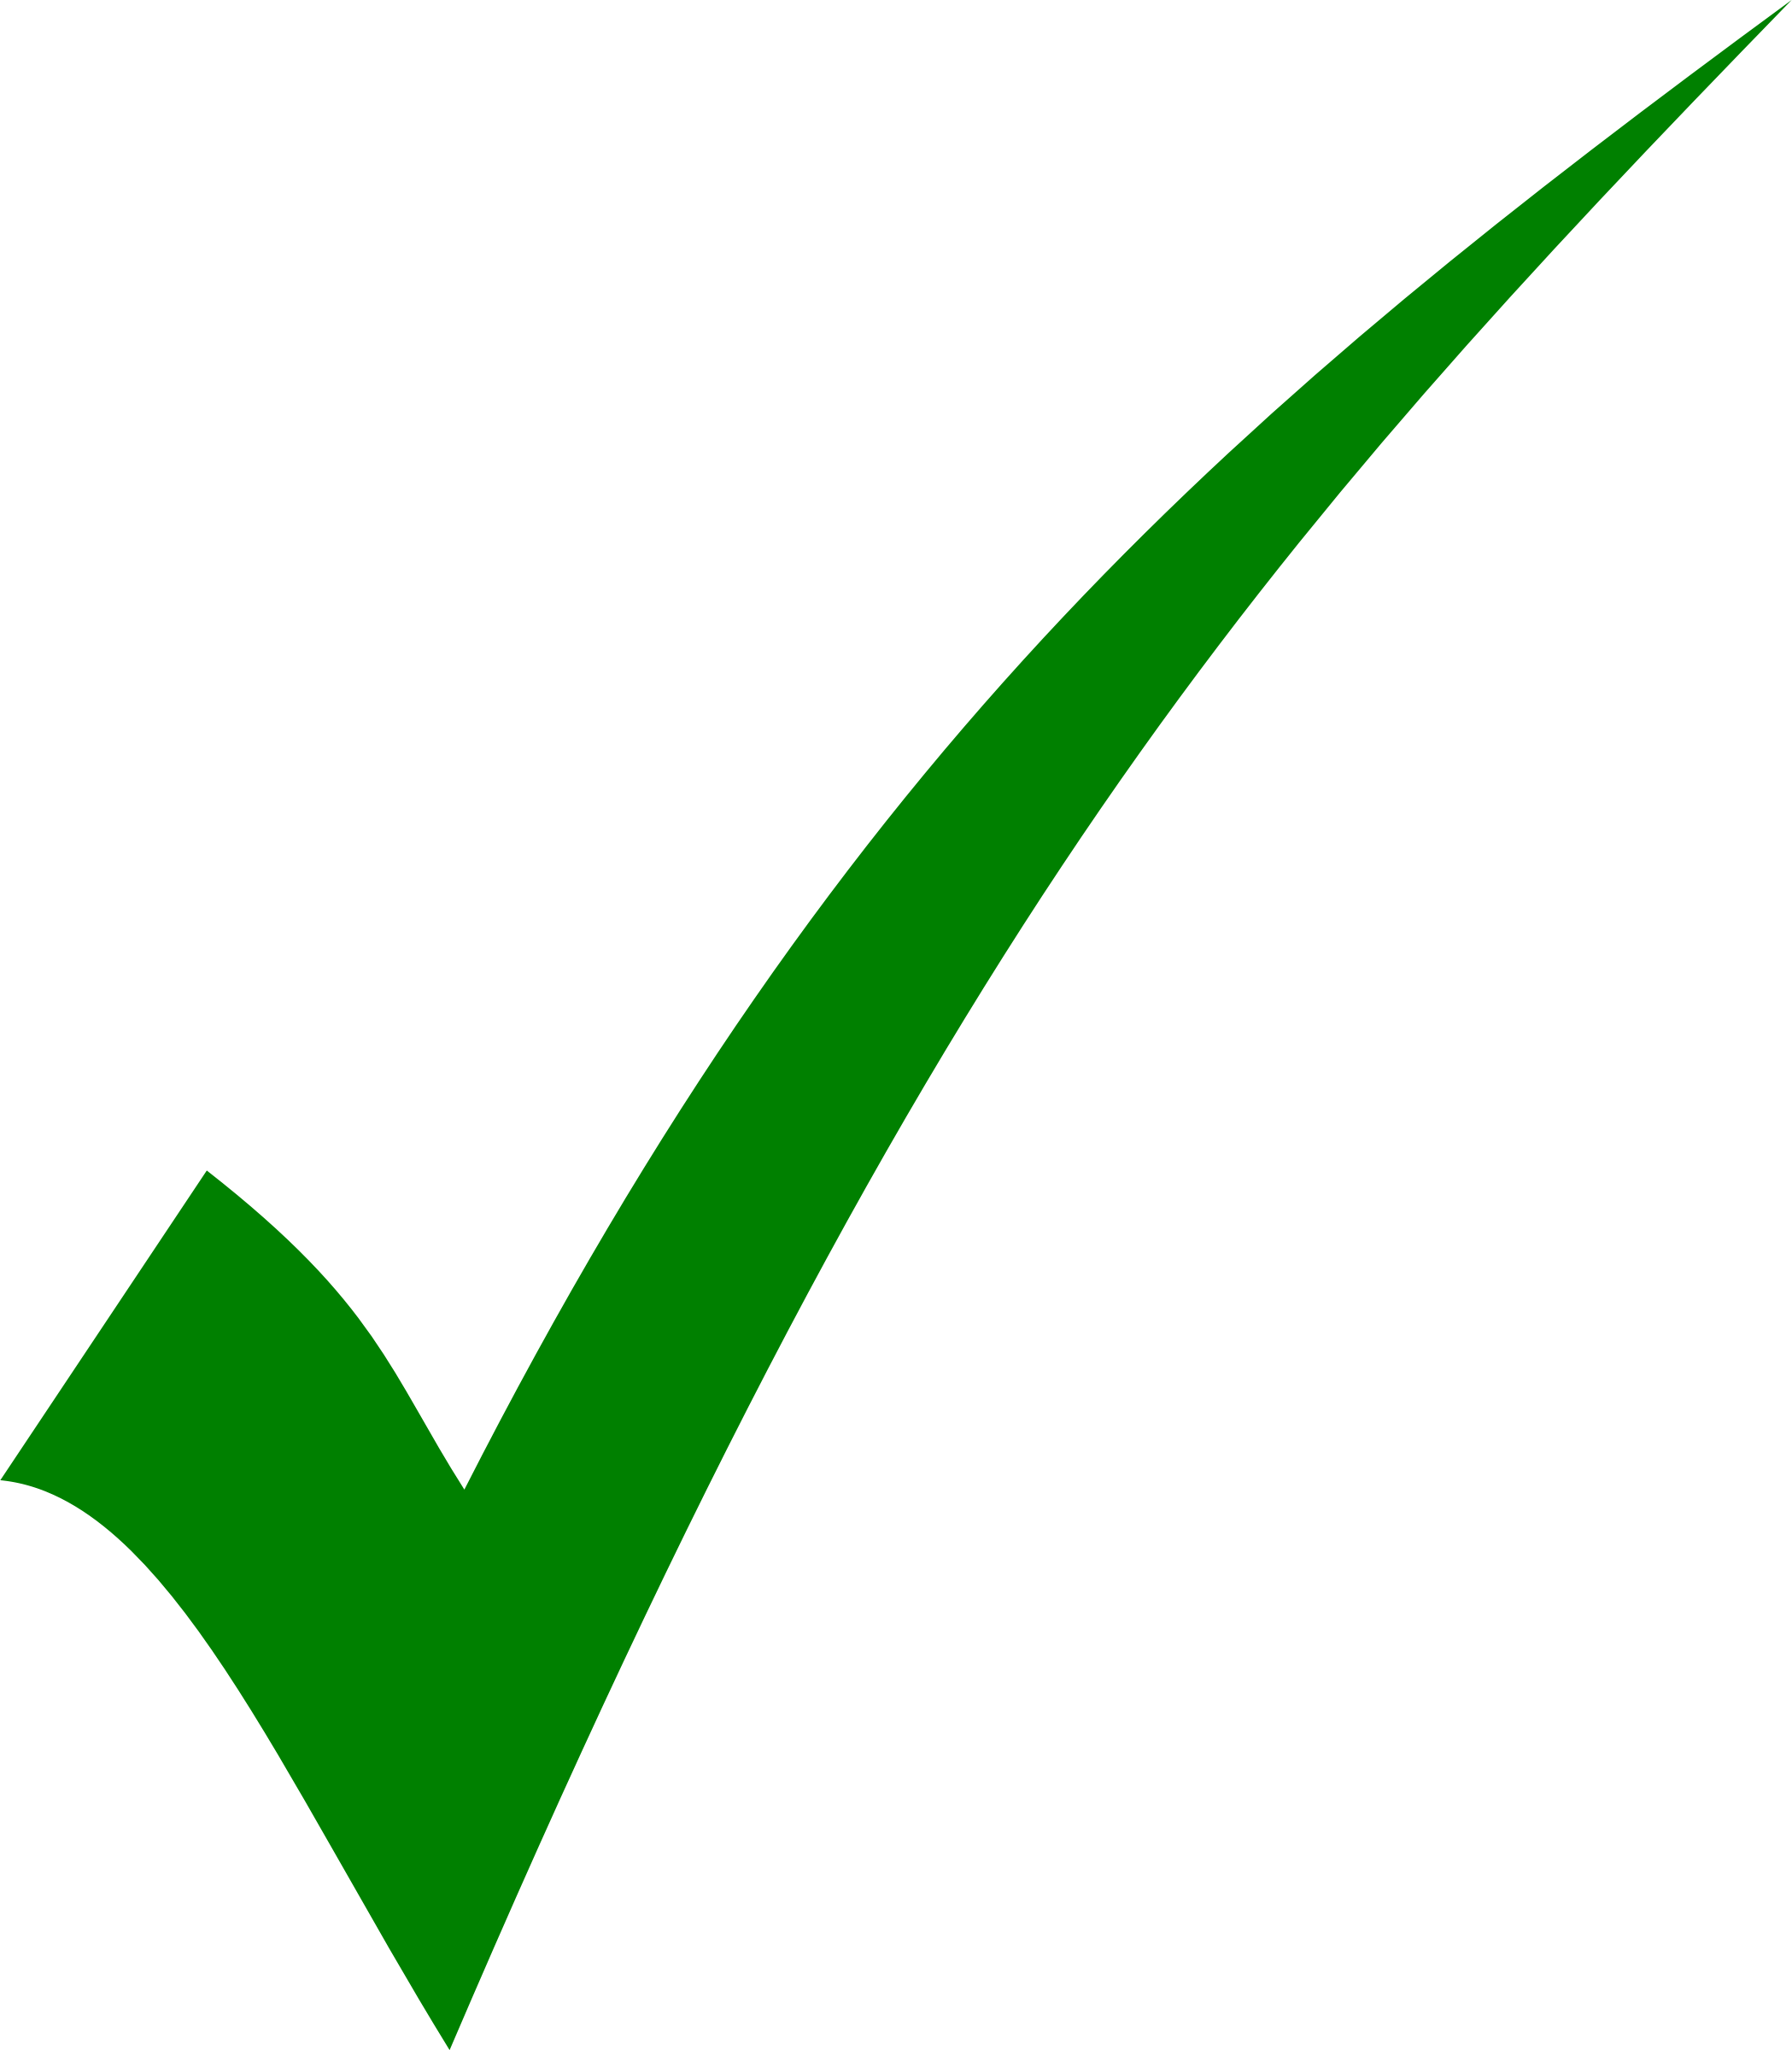 Clipart - Green tick - simple